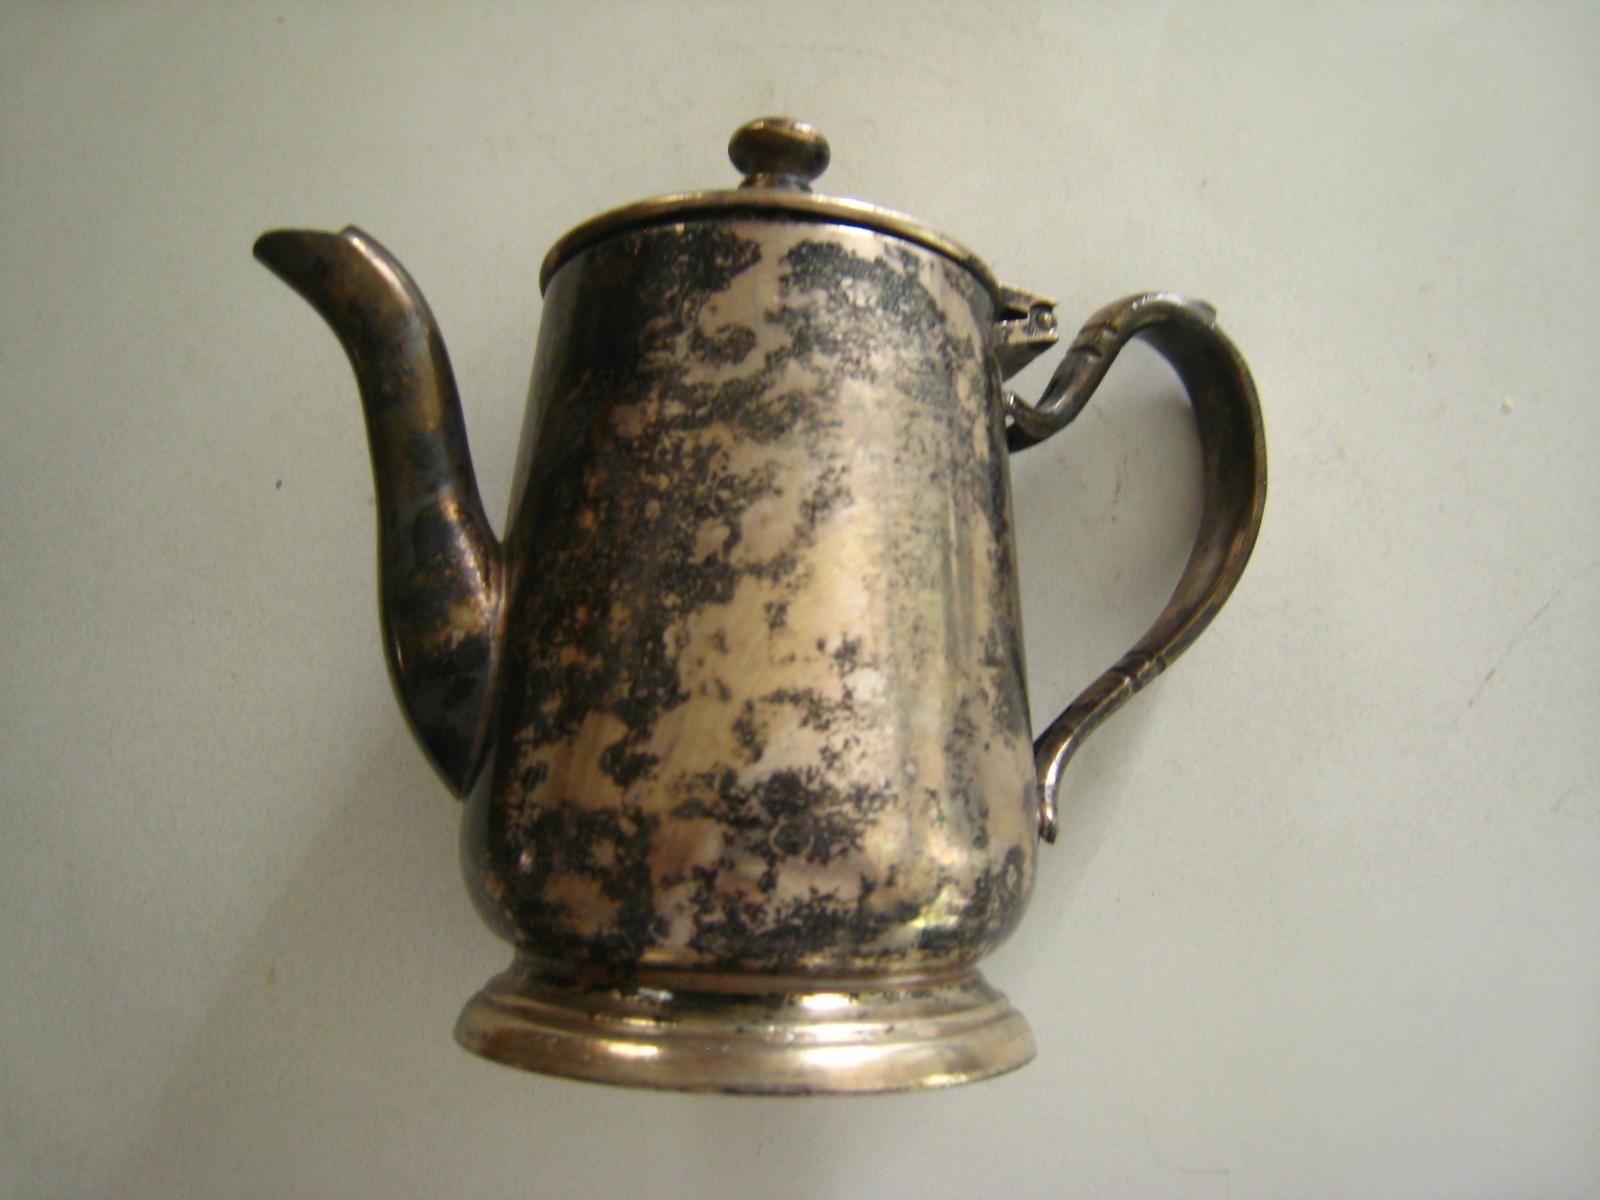 an antique silver coffee pot on display against the wall